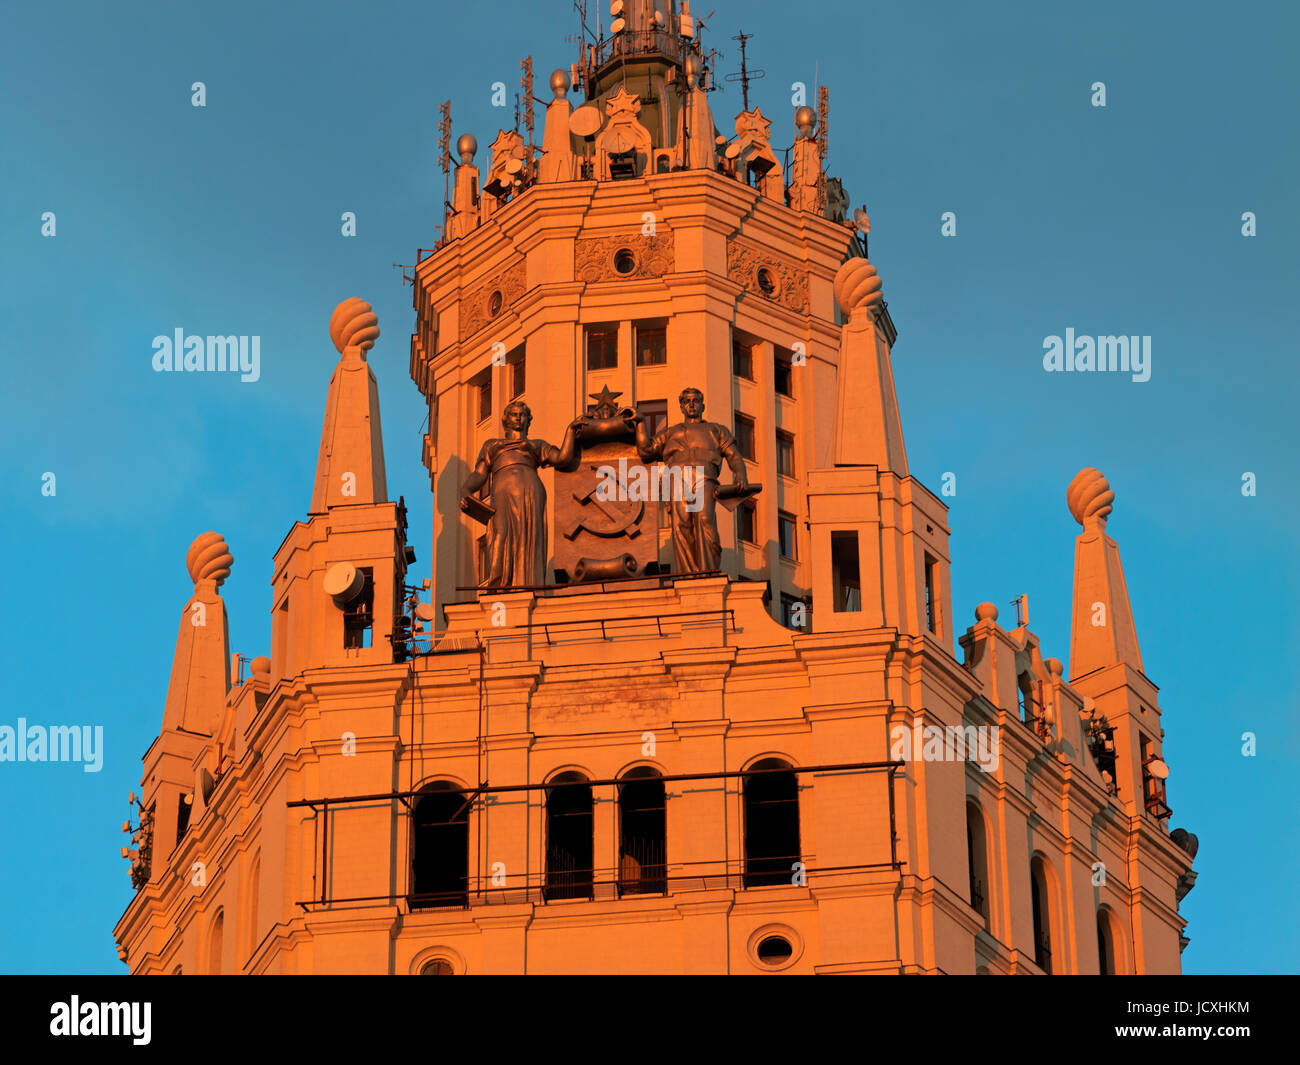 appartment house at Kotelnitsheskaya nab., Moscow, Russia, Europe, Seven Sisters, Stalin architecture, skyscraper Stock Photo